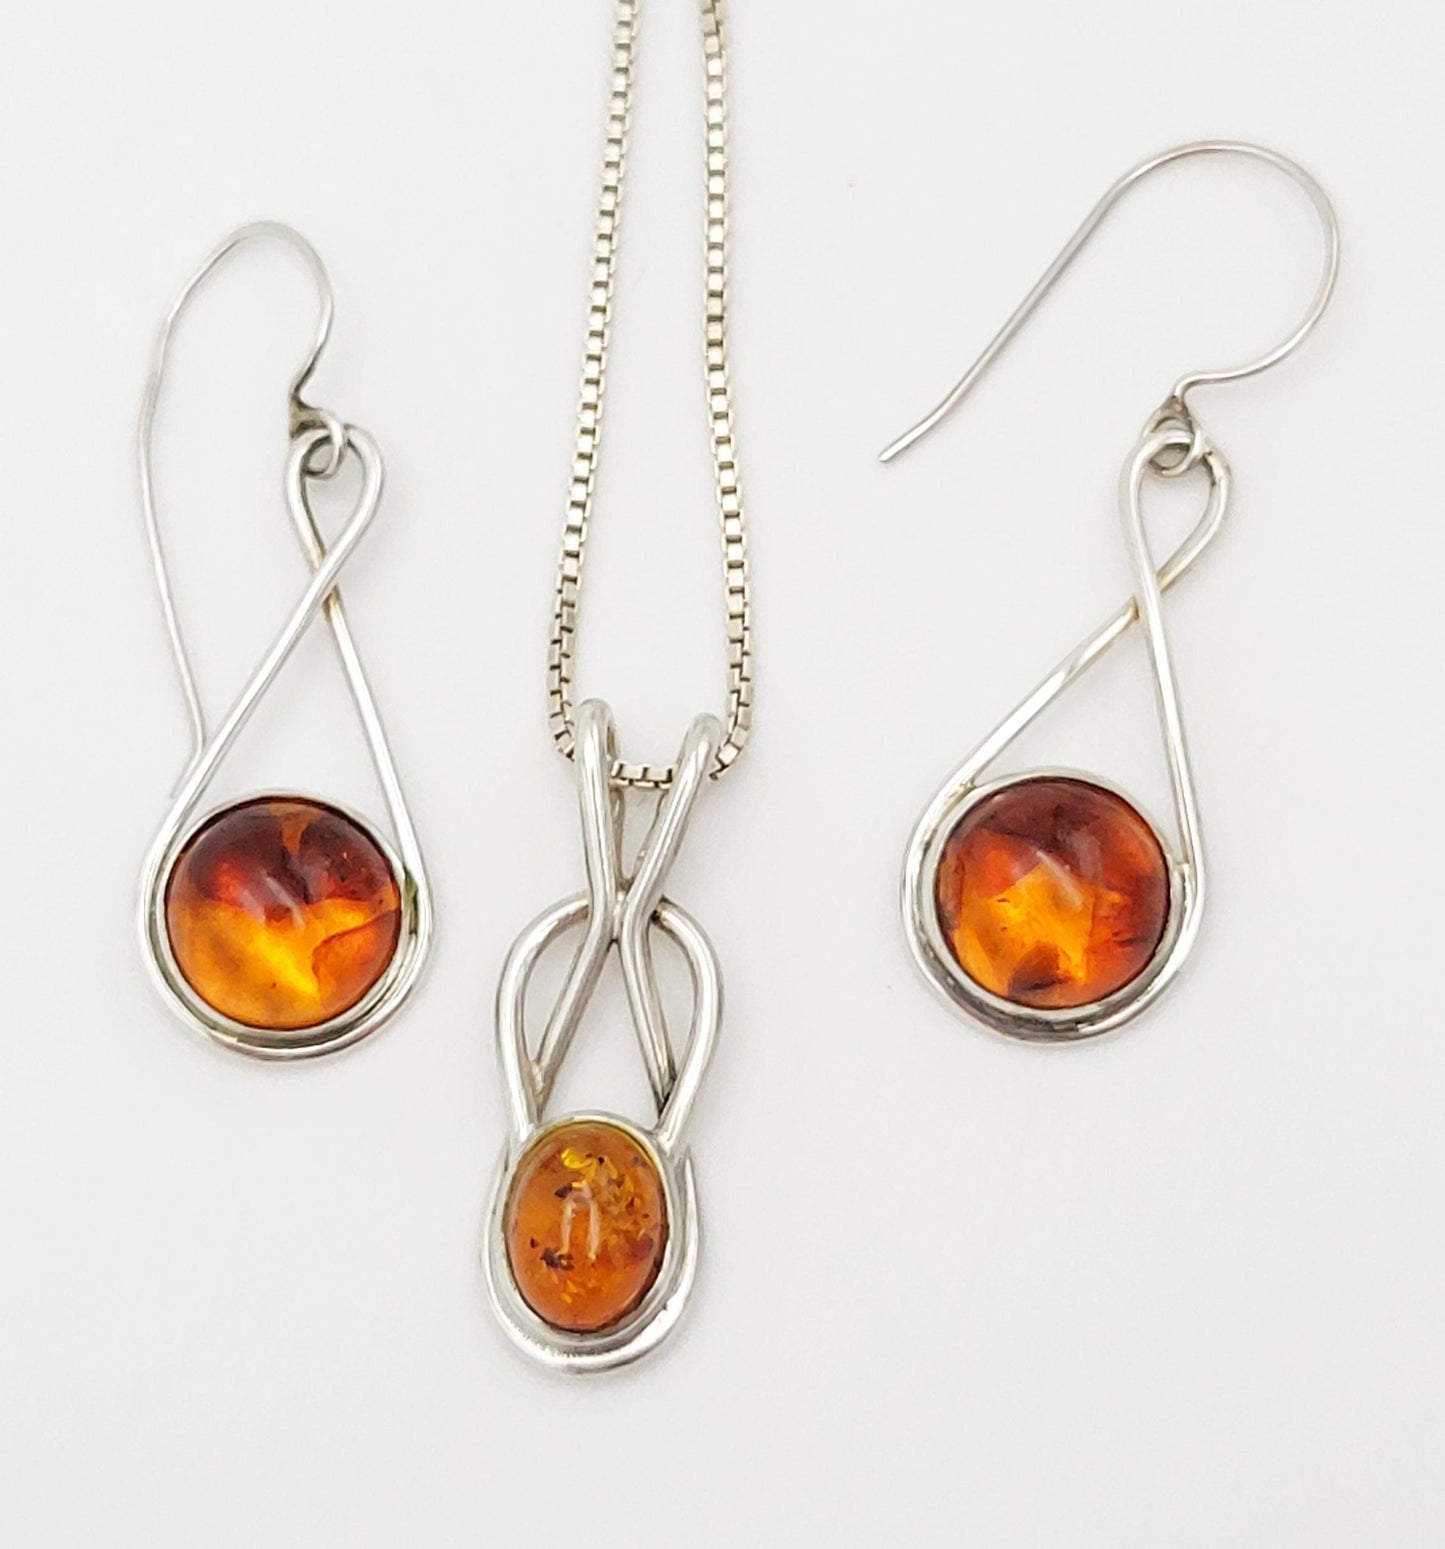 TMHM Jewelry Artisan Sterling & Amber Modernist Necklace & Earring Set Signed